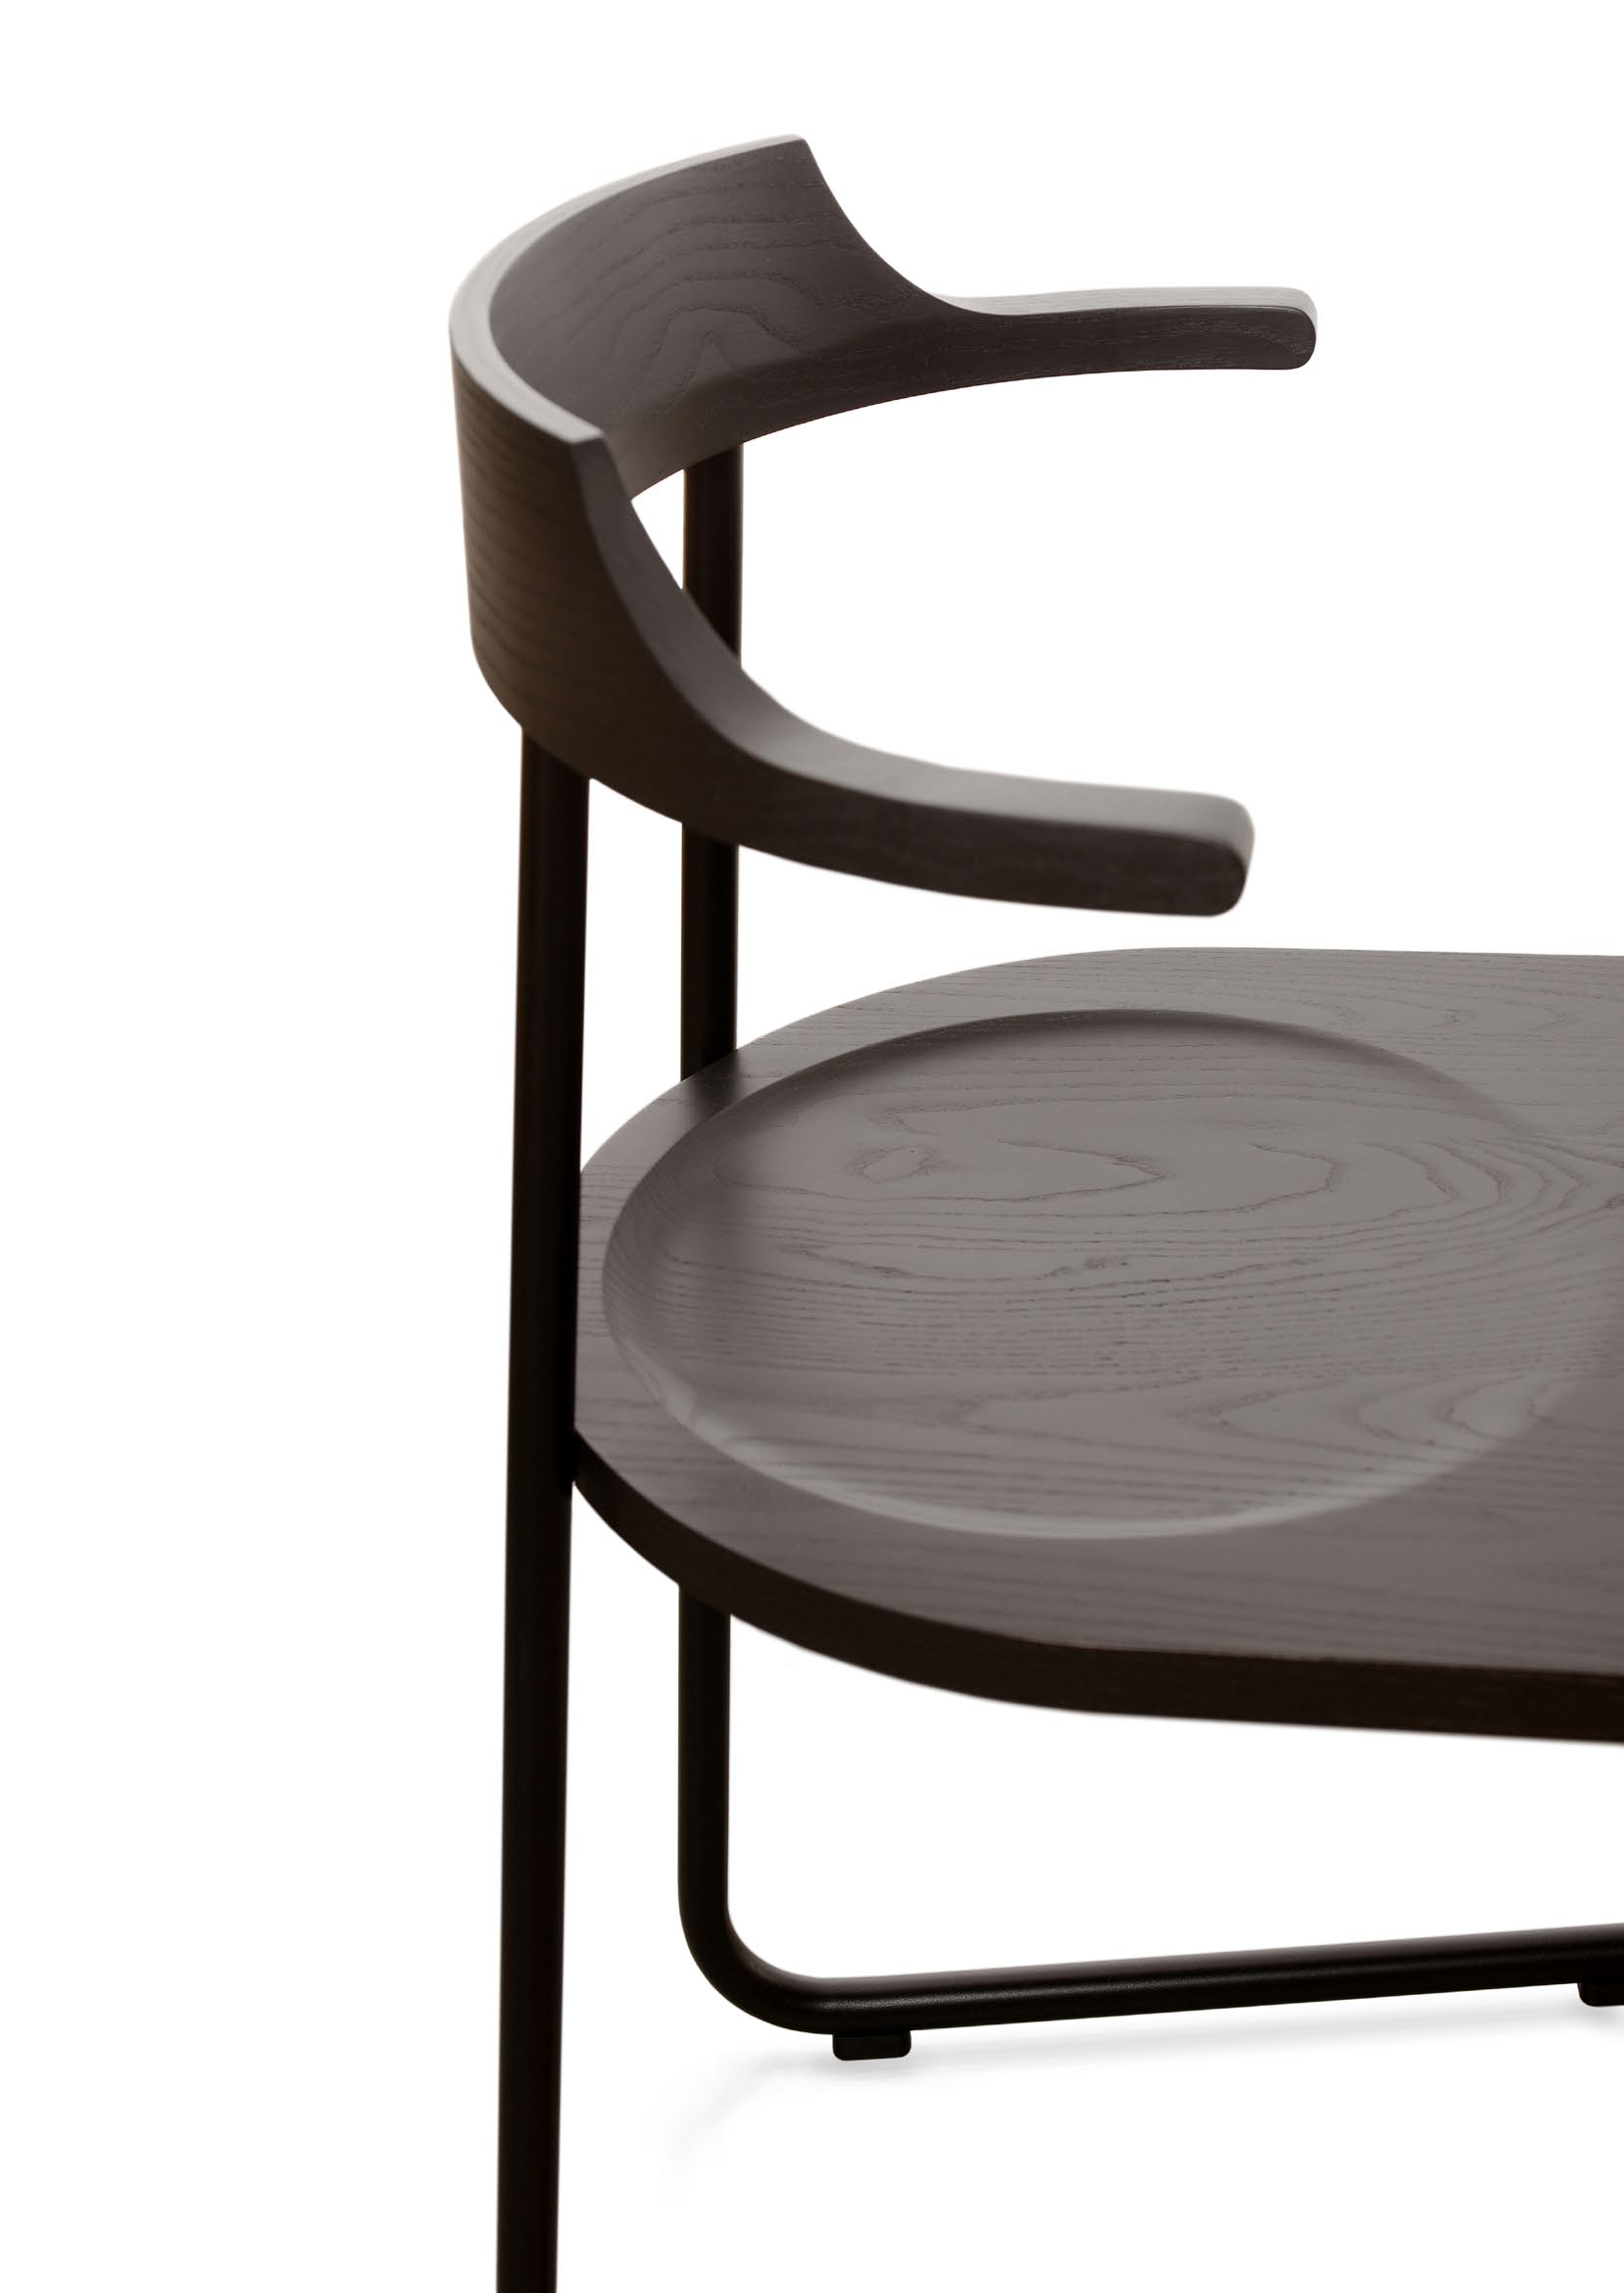 CHAIR DESCRIPTION Born from the desire to design a café chair with a light appearance, modern form, yet strong enough for intensive use.